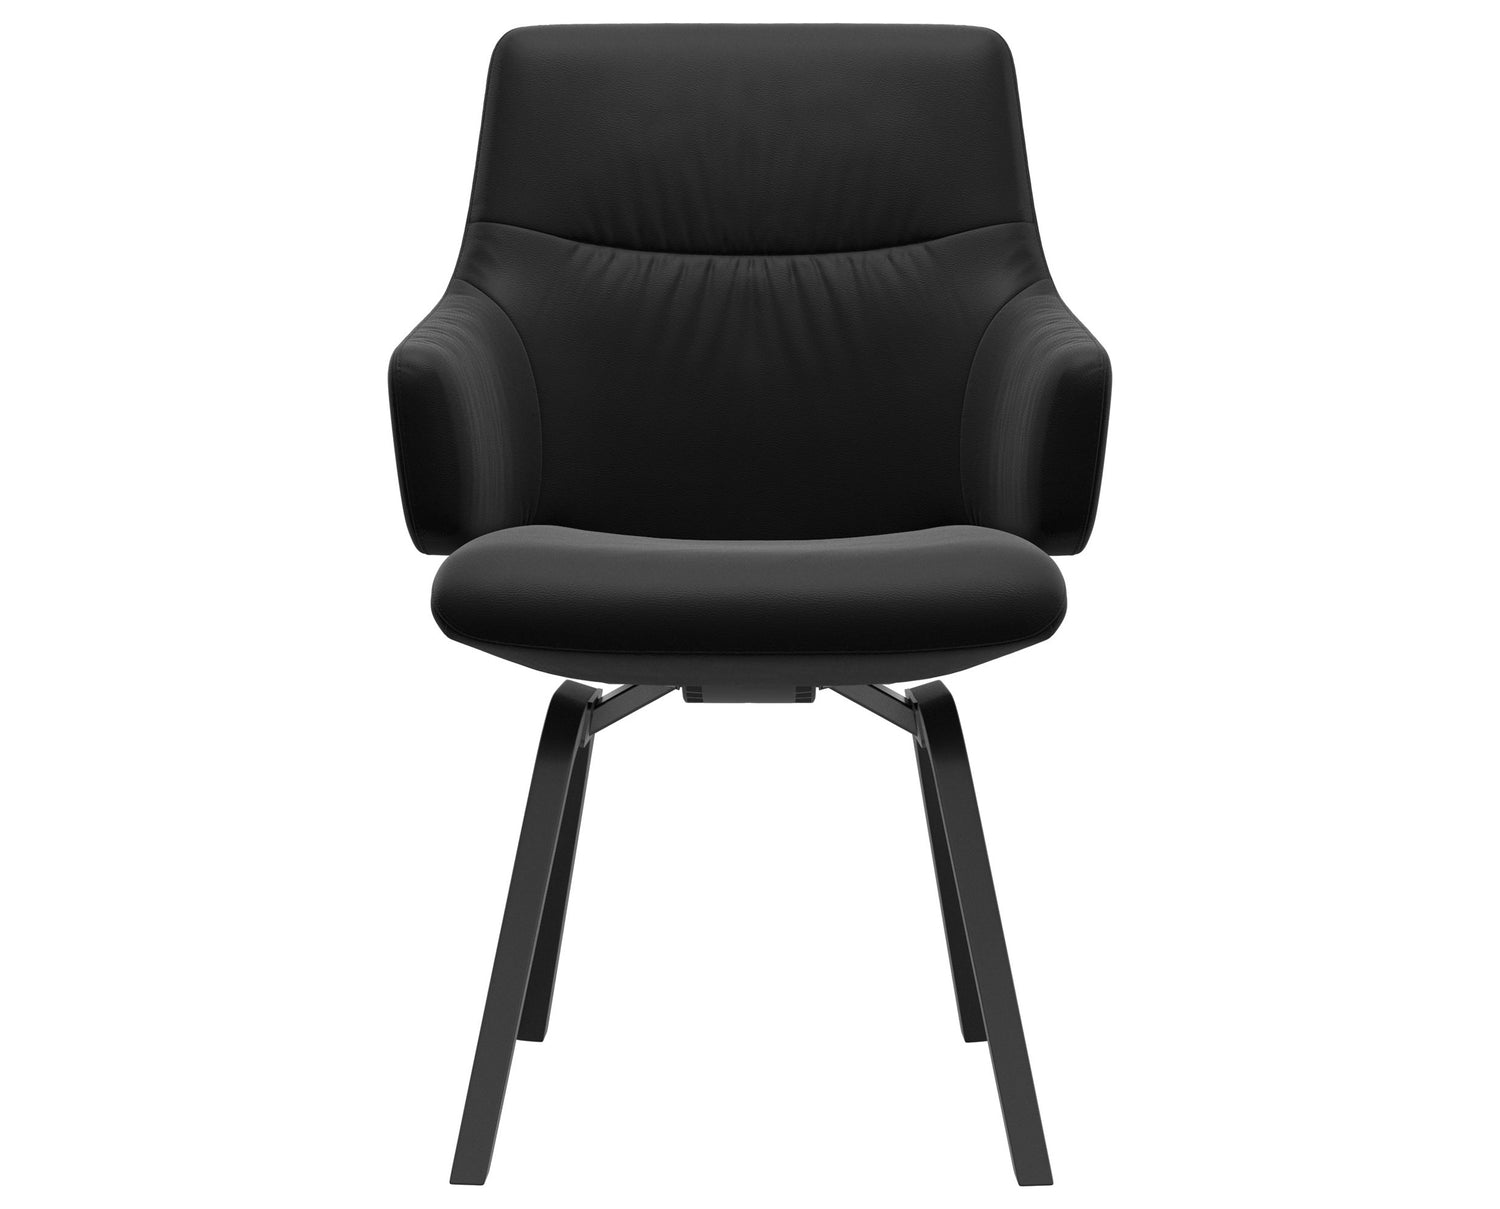 Paloma Leather Black & Black Base | Stressless Mint Low Back D200 Dining Chair w/Arms | Valley Ridge Furniture